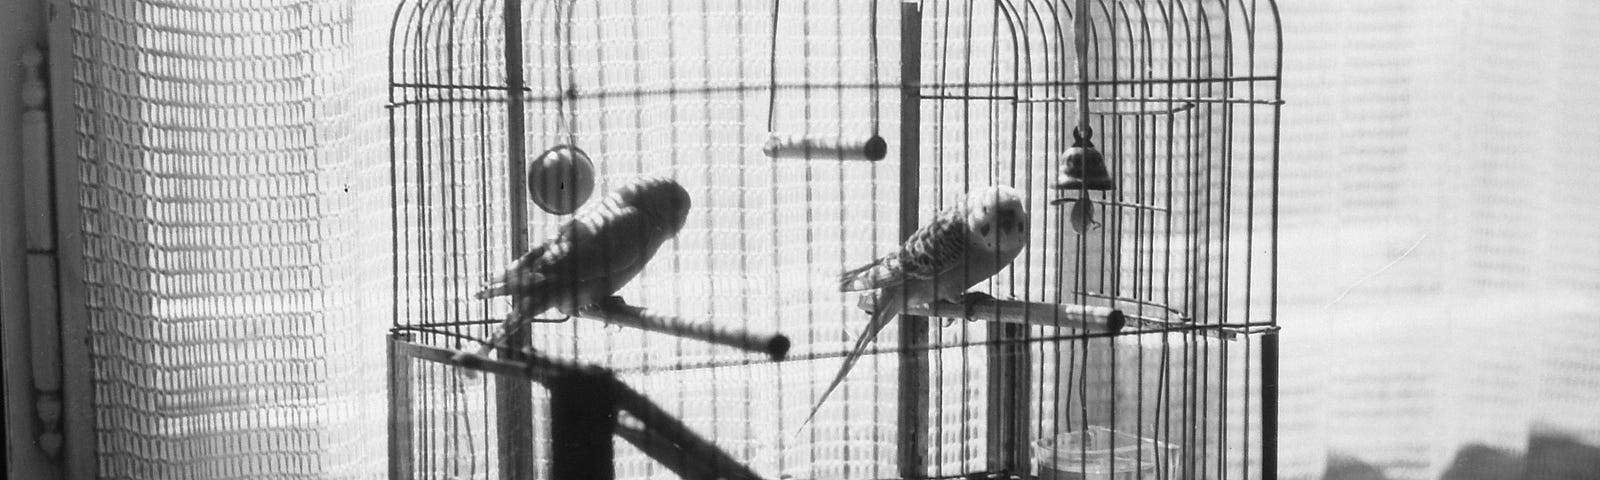 A black and white photo of two birds inside a cage.